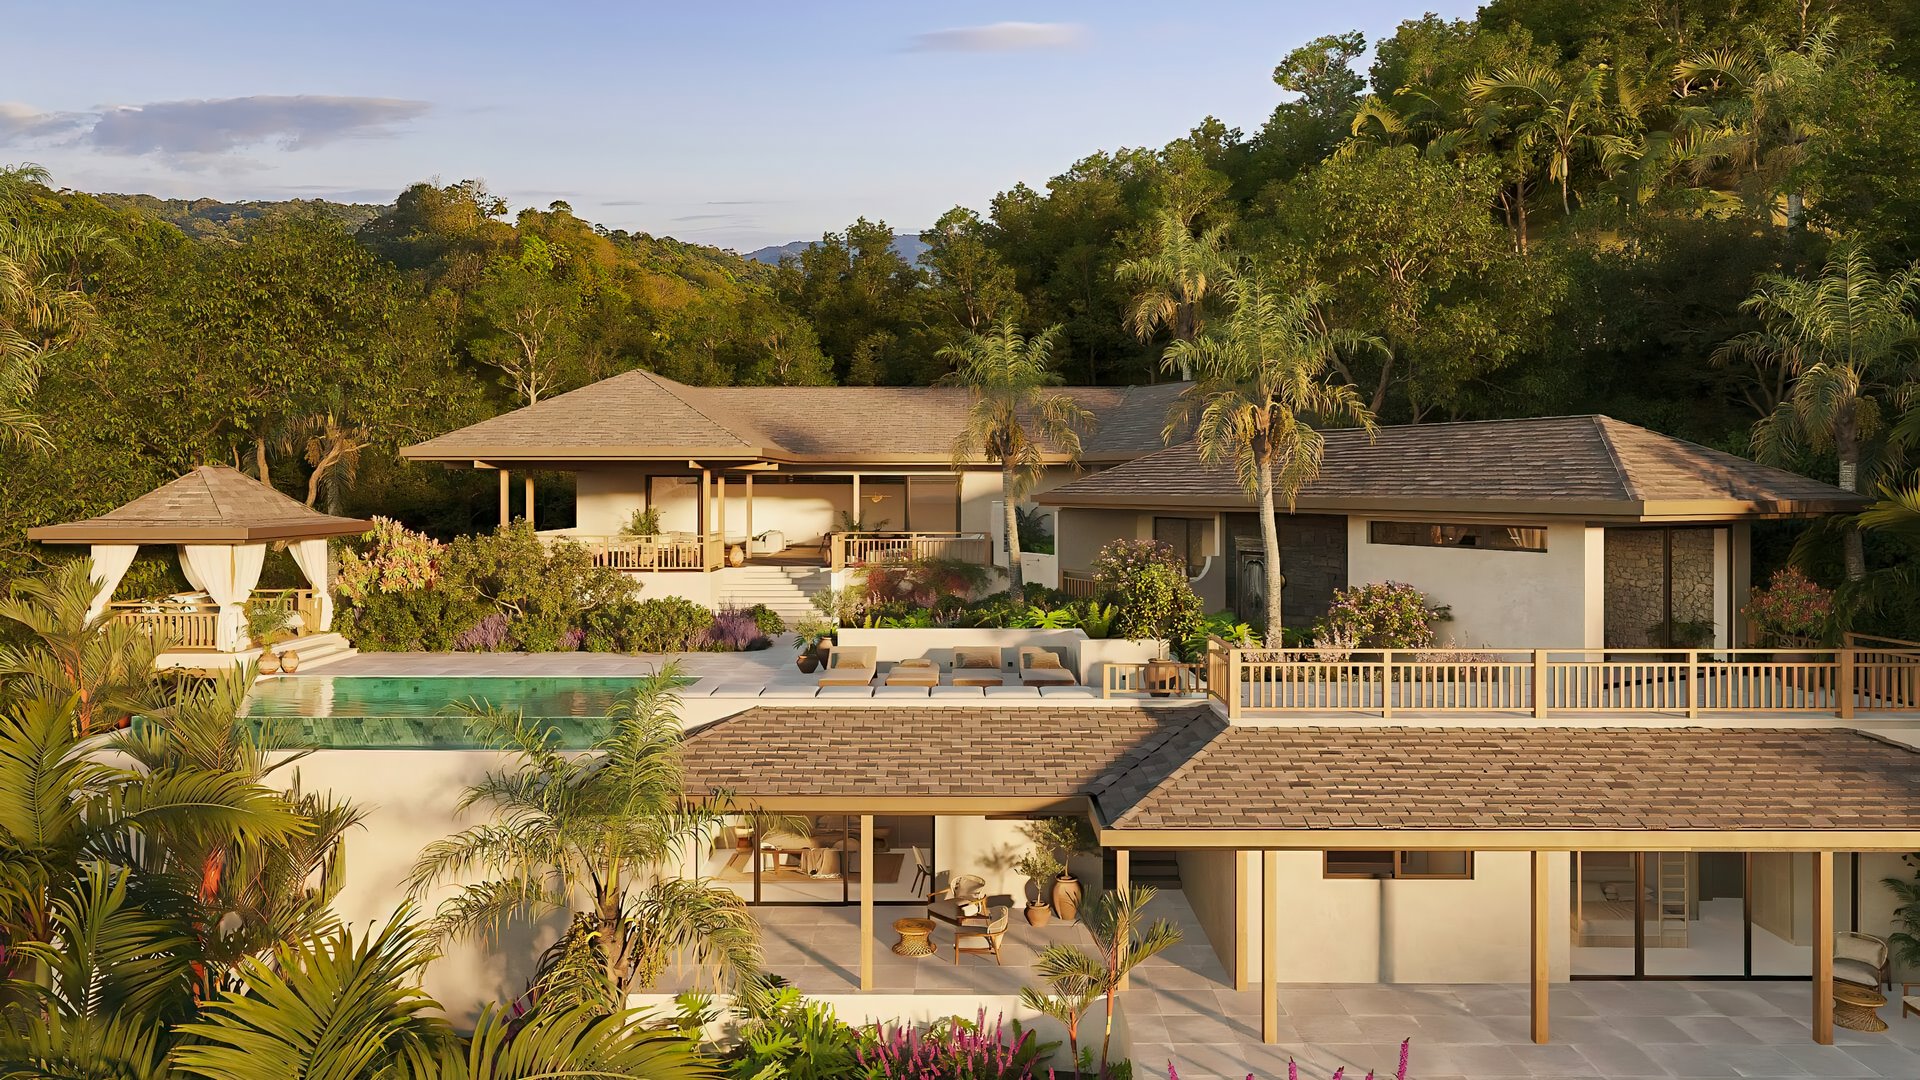 10969-The home for sale in the most exclusive community in Tamarindo, Costa Rica